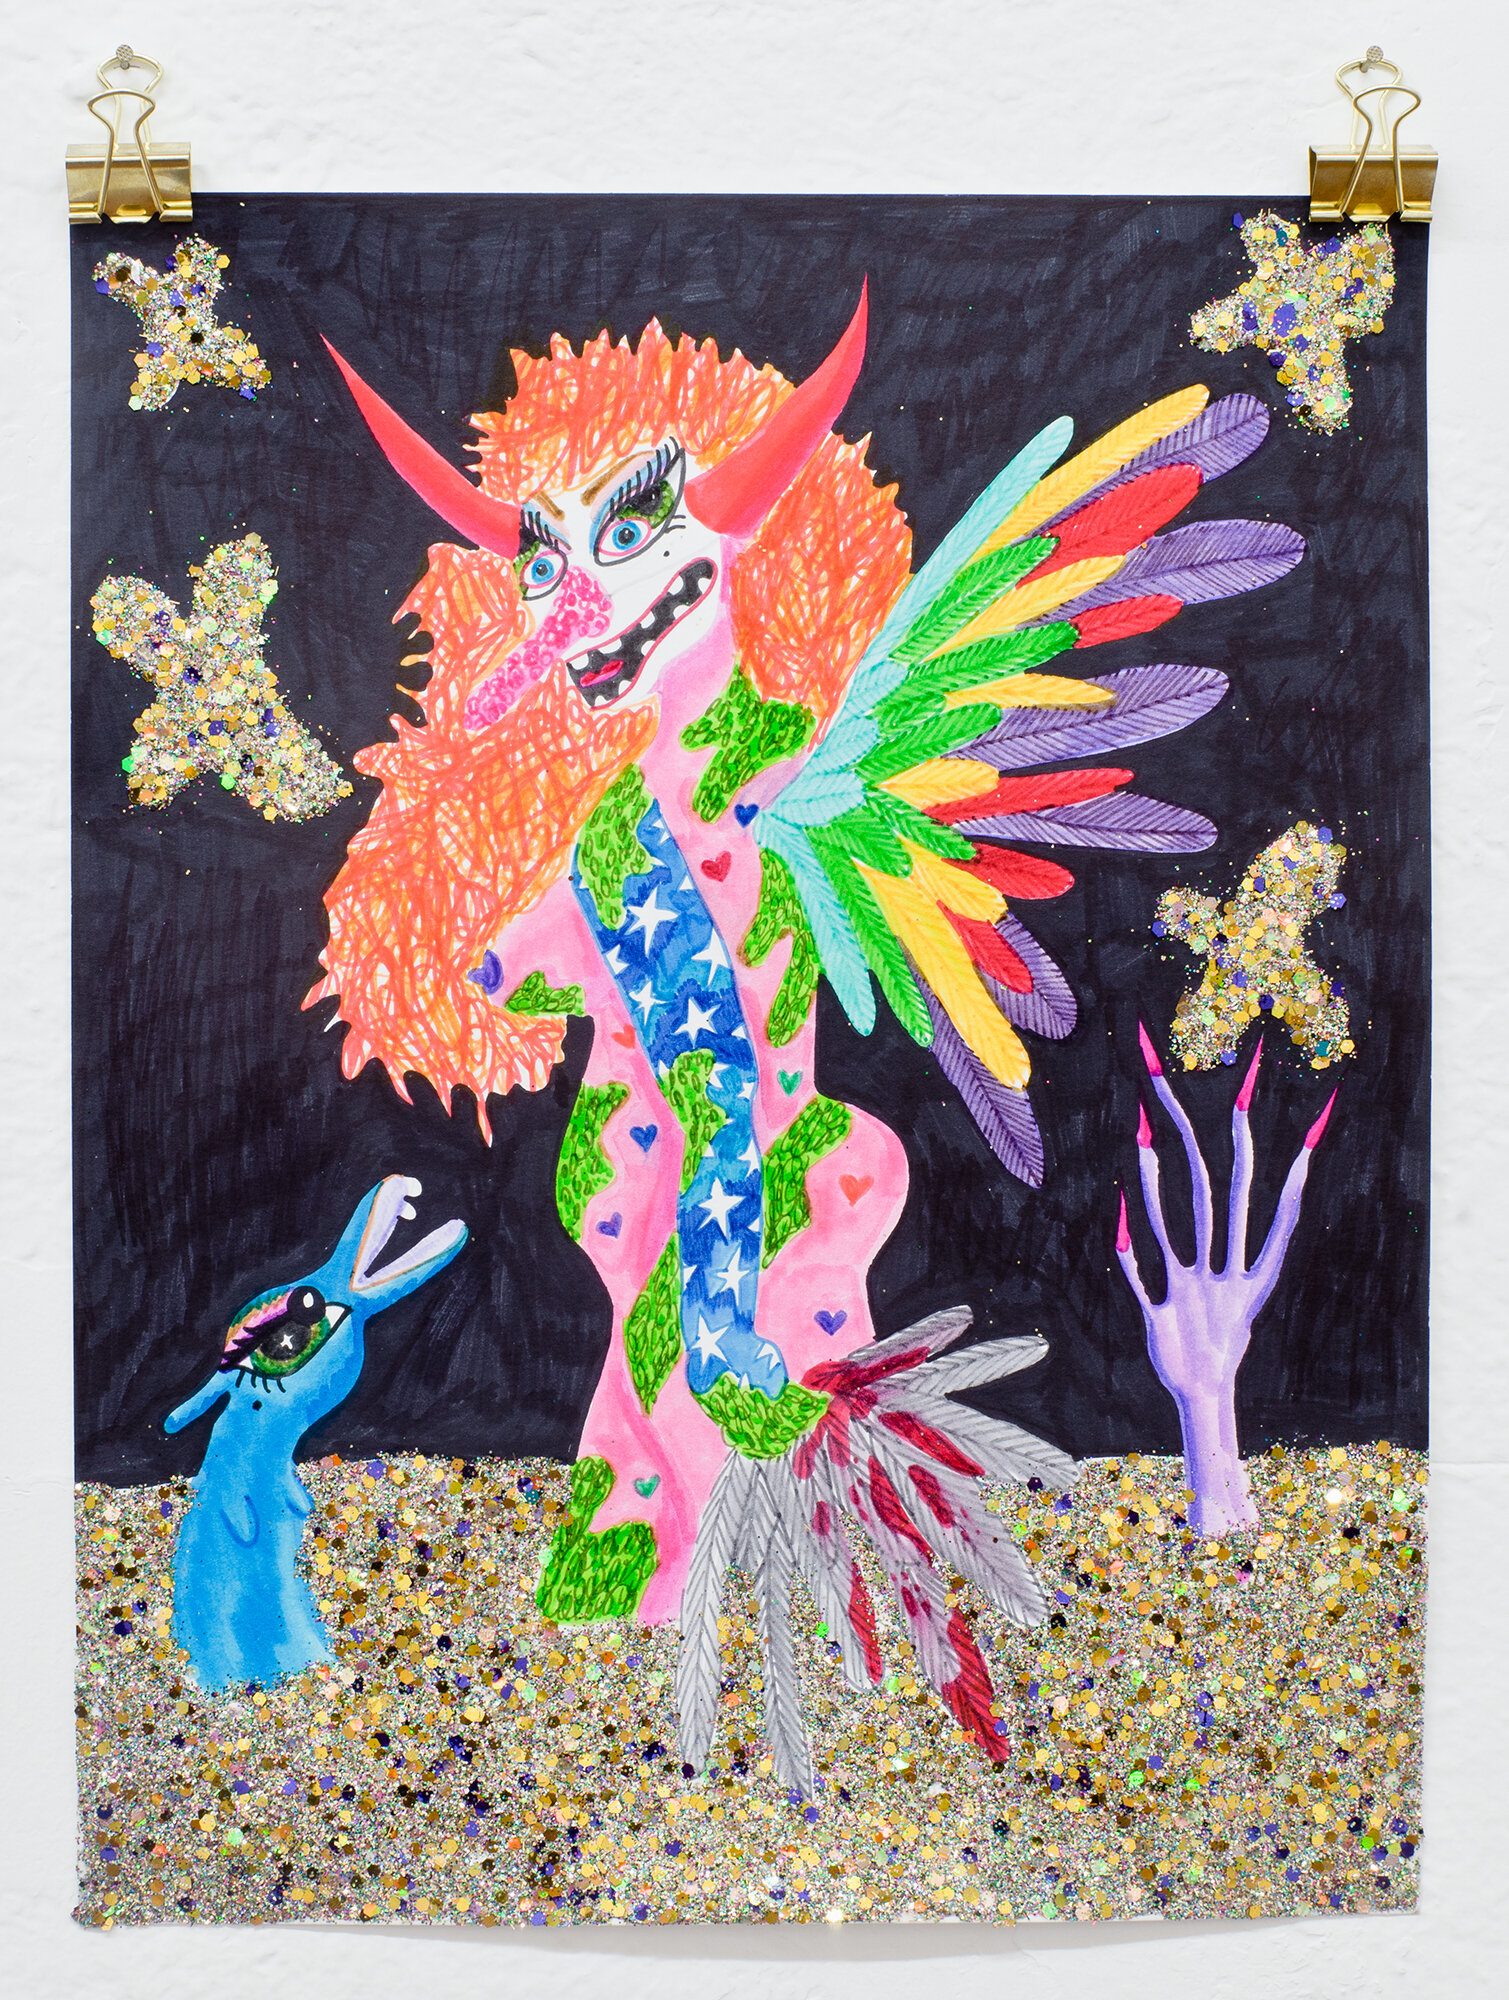   Ripped Wings,  2017  14 x 11 Inches (35.56 x 27.94 cm.)  Colored marker and glitter on paper 